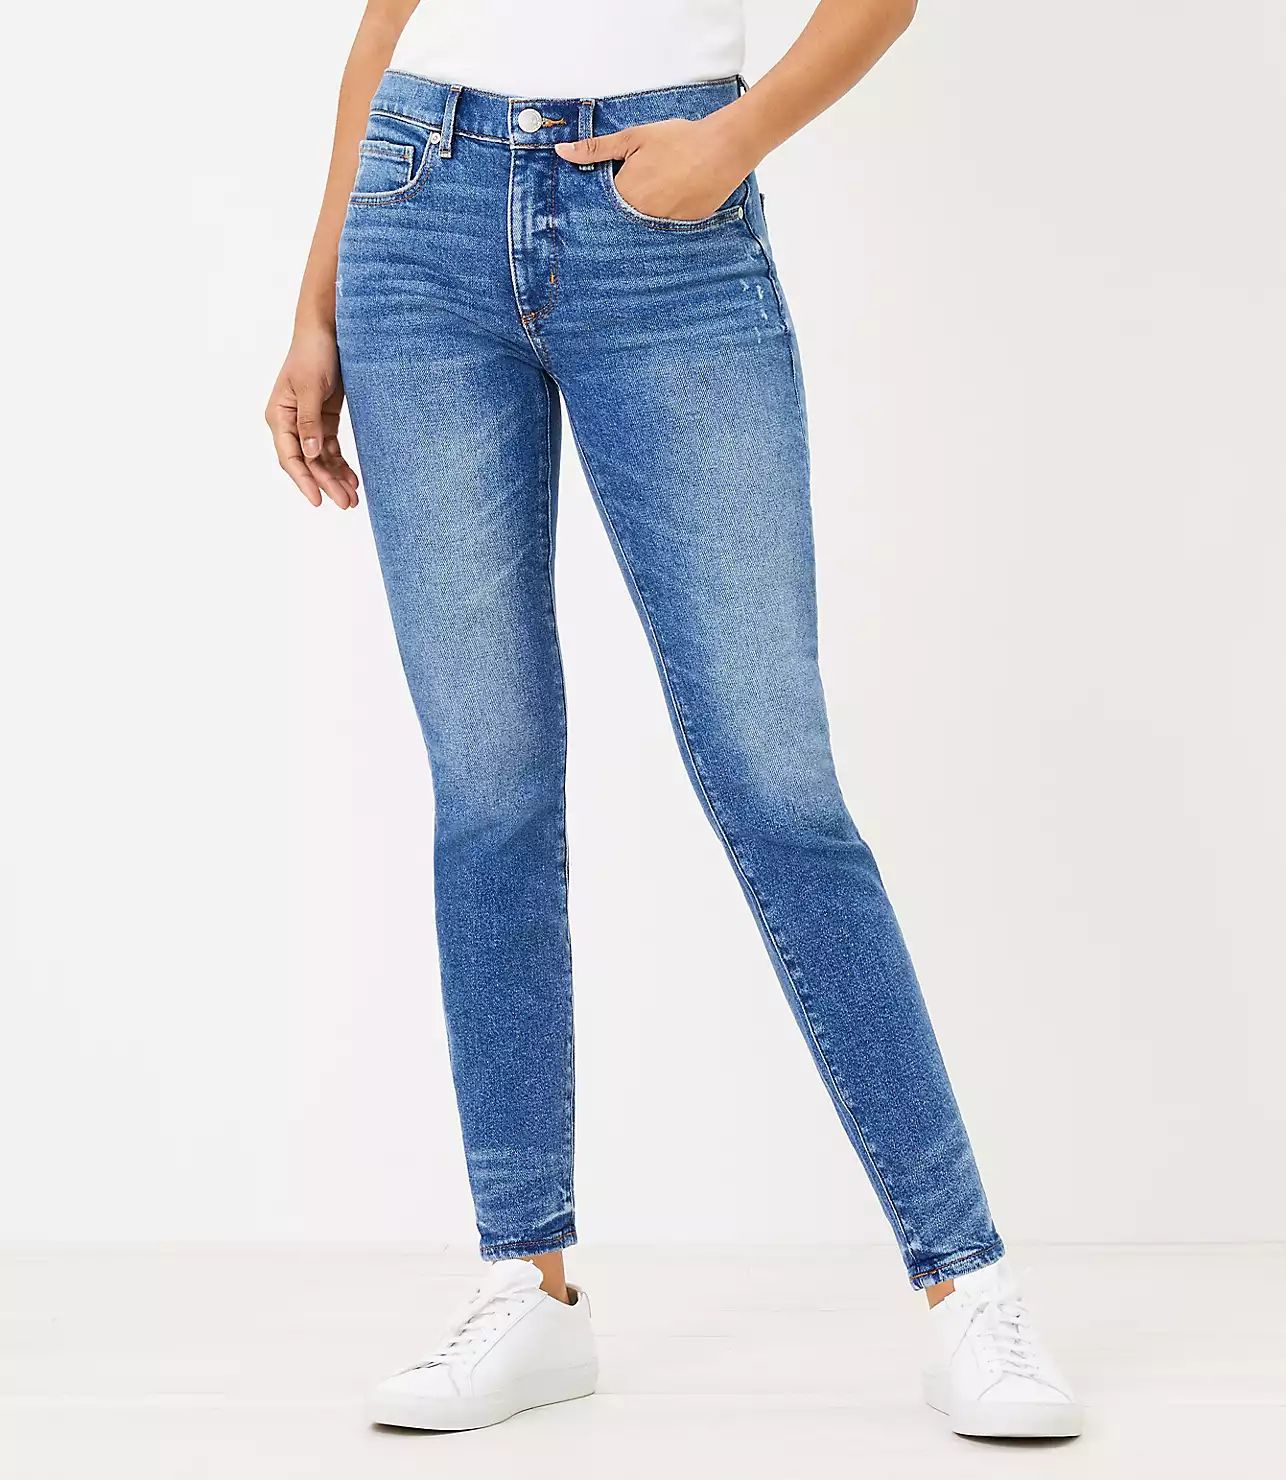 Skinny Jeans in Authentic Mid Vintage Wash | LOFT